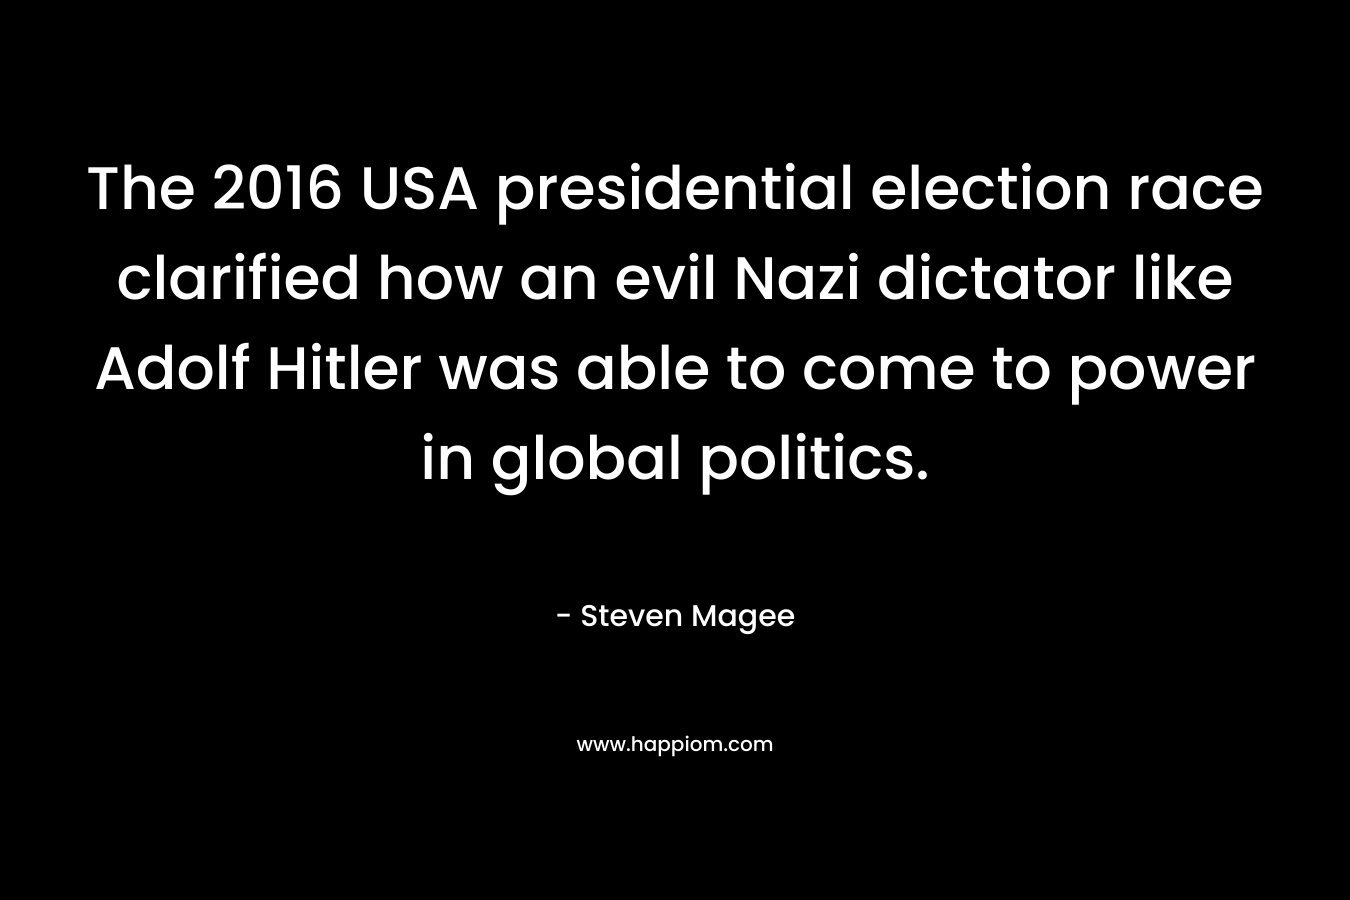 The 2016 USA presidential election race clarified how an evil Nazi dictator like Adolf Hitler was able to come to power in global politics. – Steven Magee